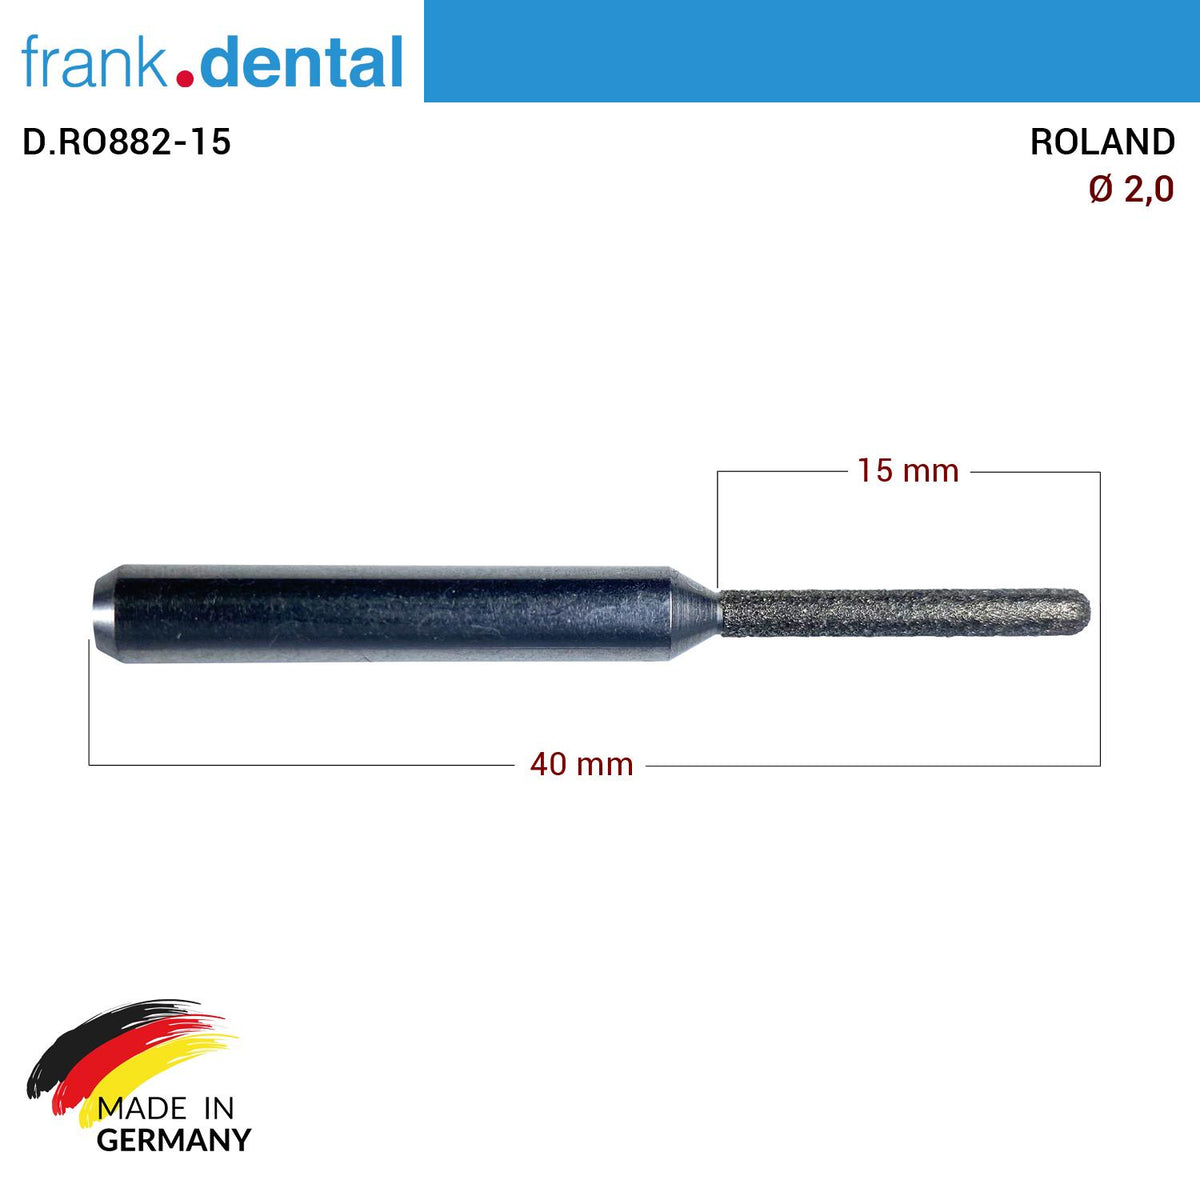 DentrealStore - Dentreal Diamond Milling Drill 2.0 mm - for Roland Milling Machine